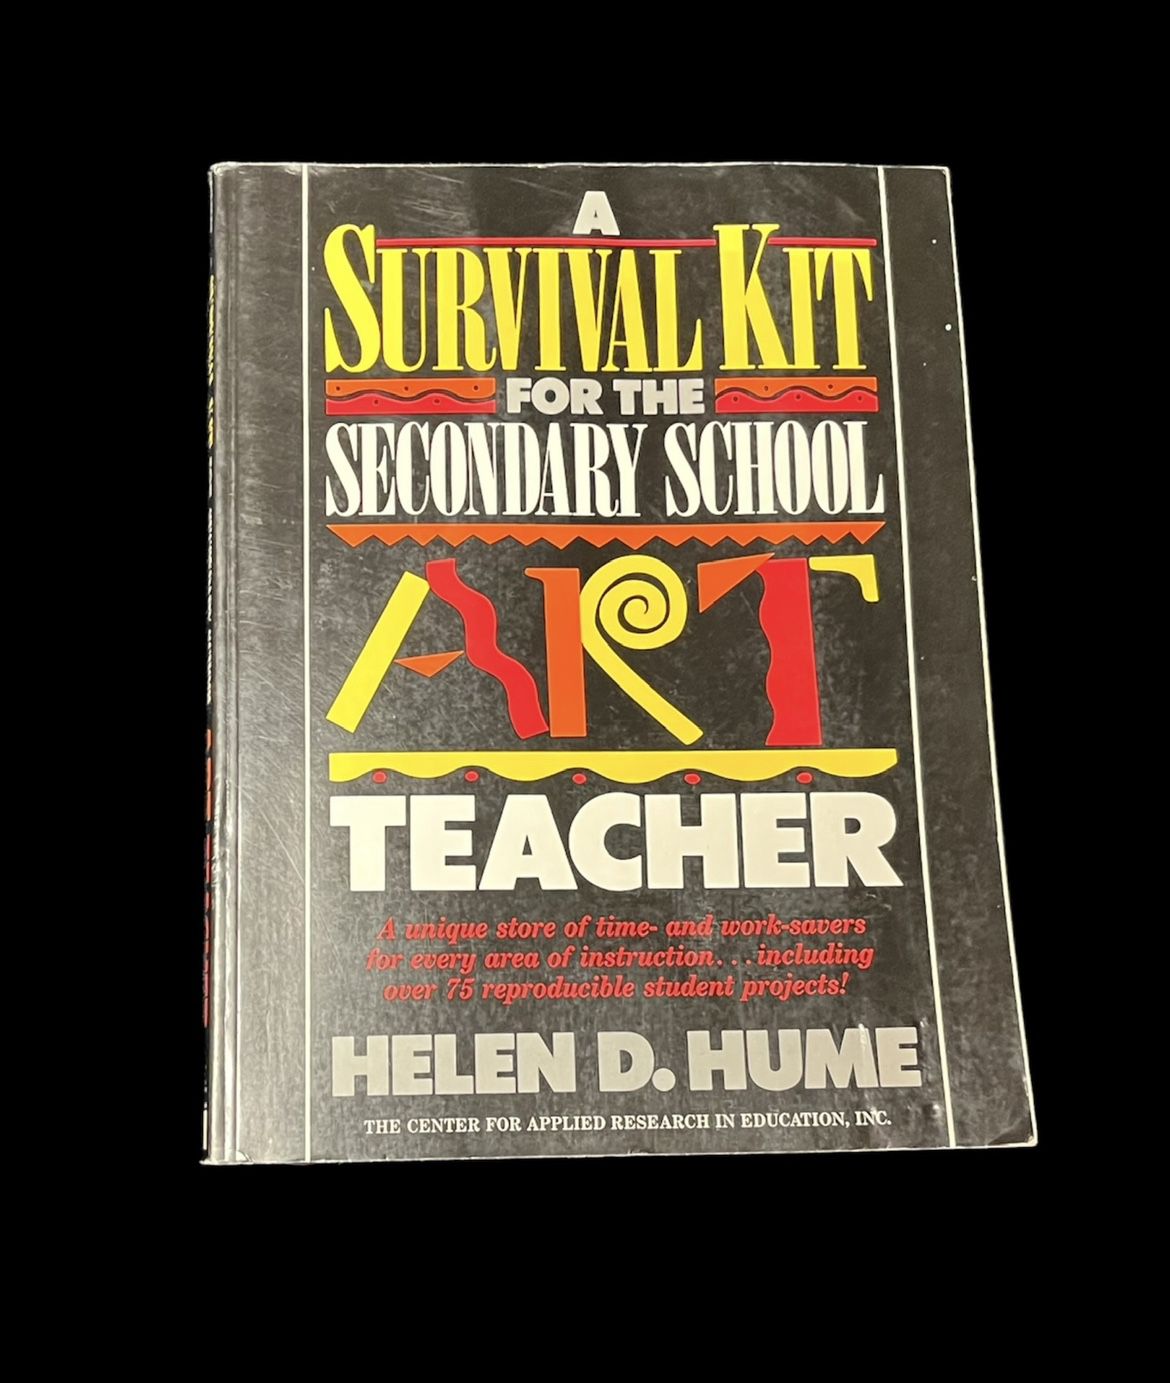  A Survival Kit for the Secondary School Art Teacher resource book by HELEN D. HUME